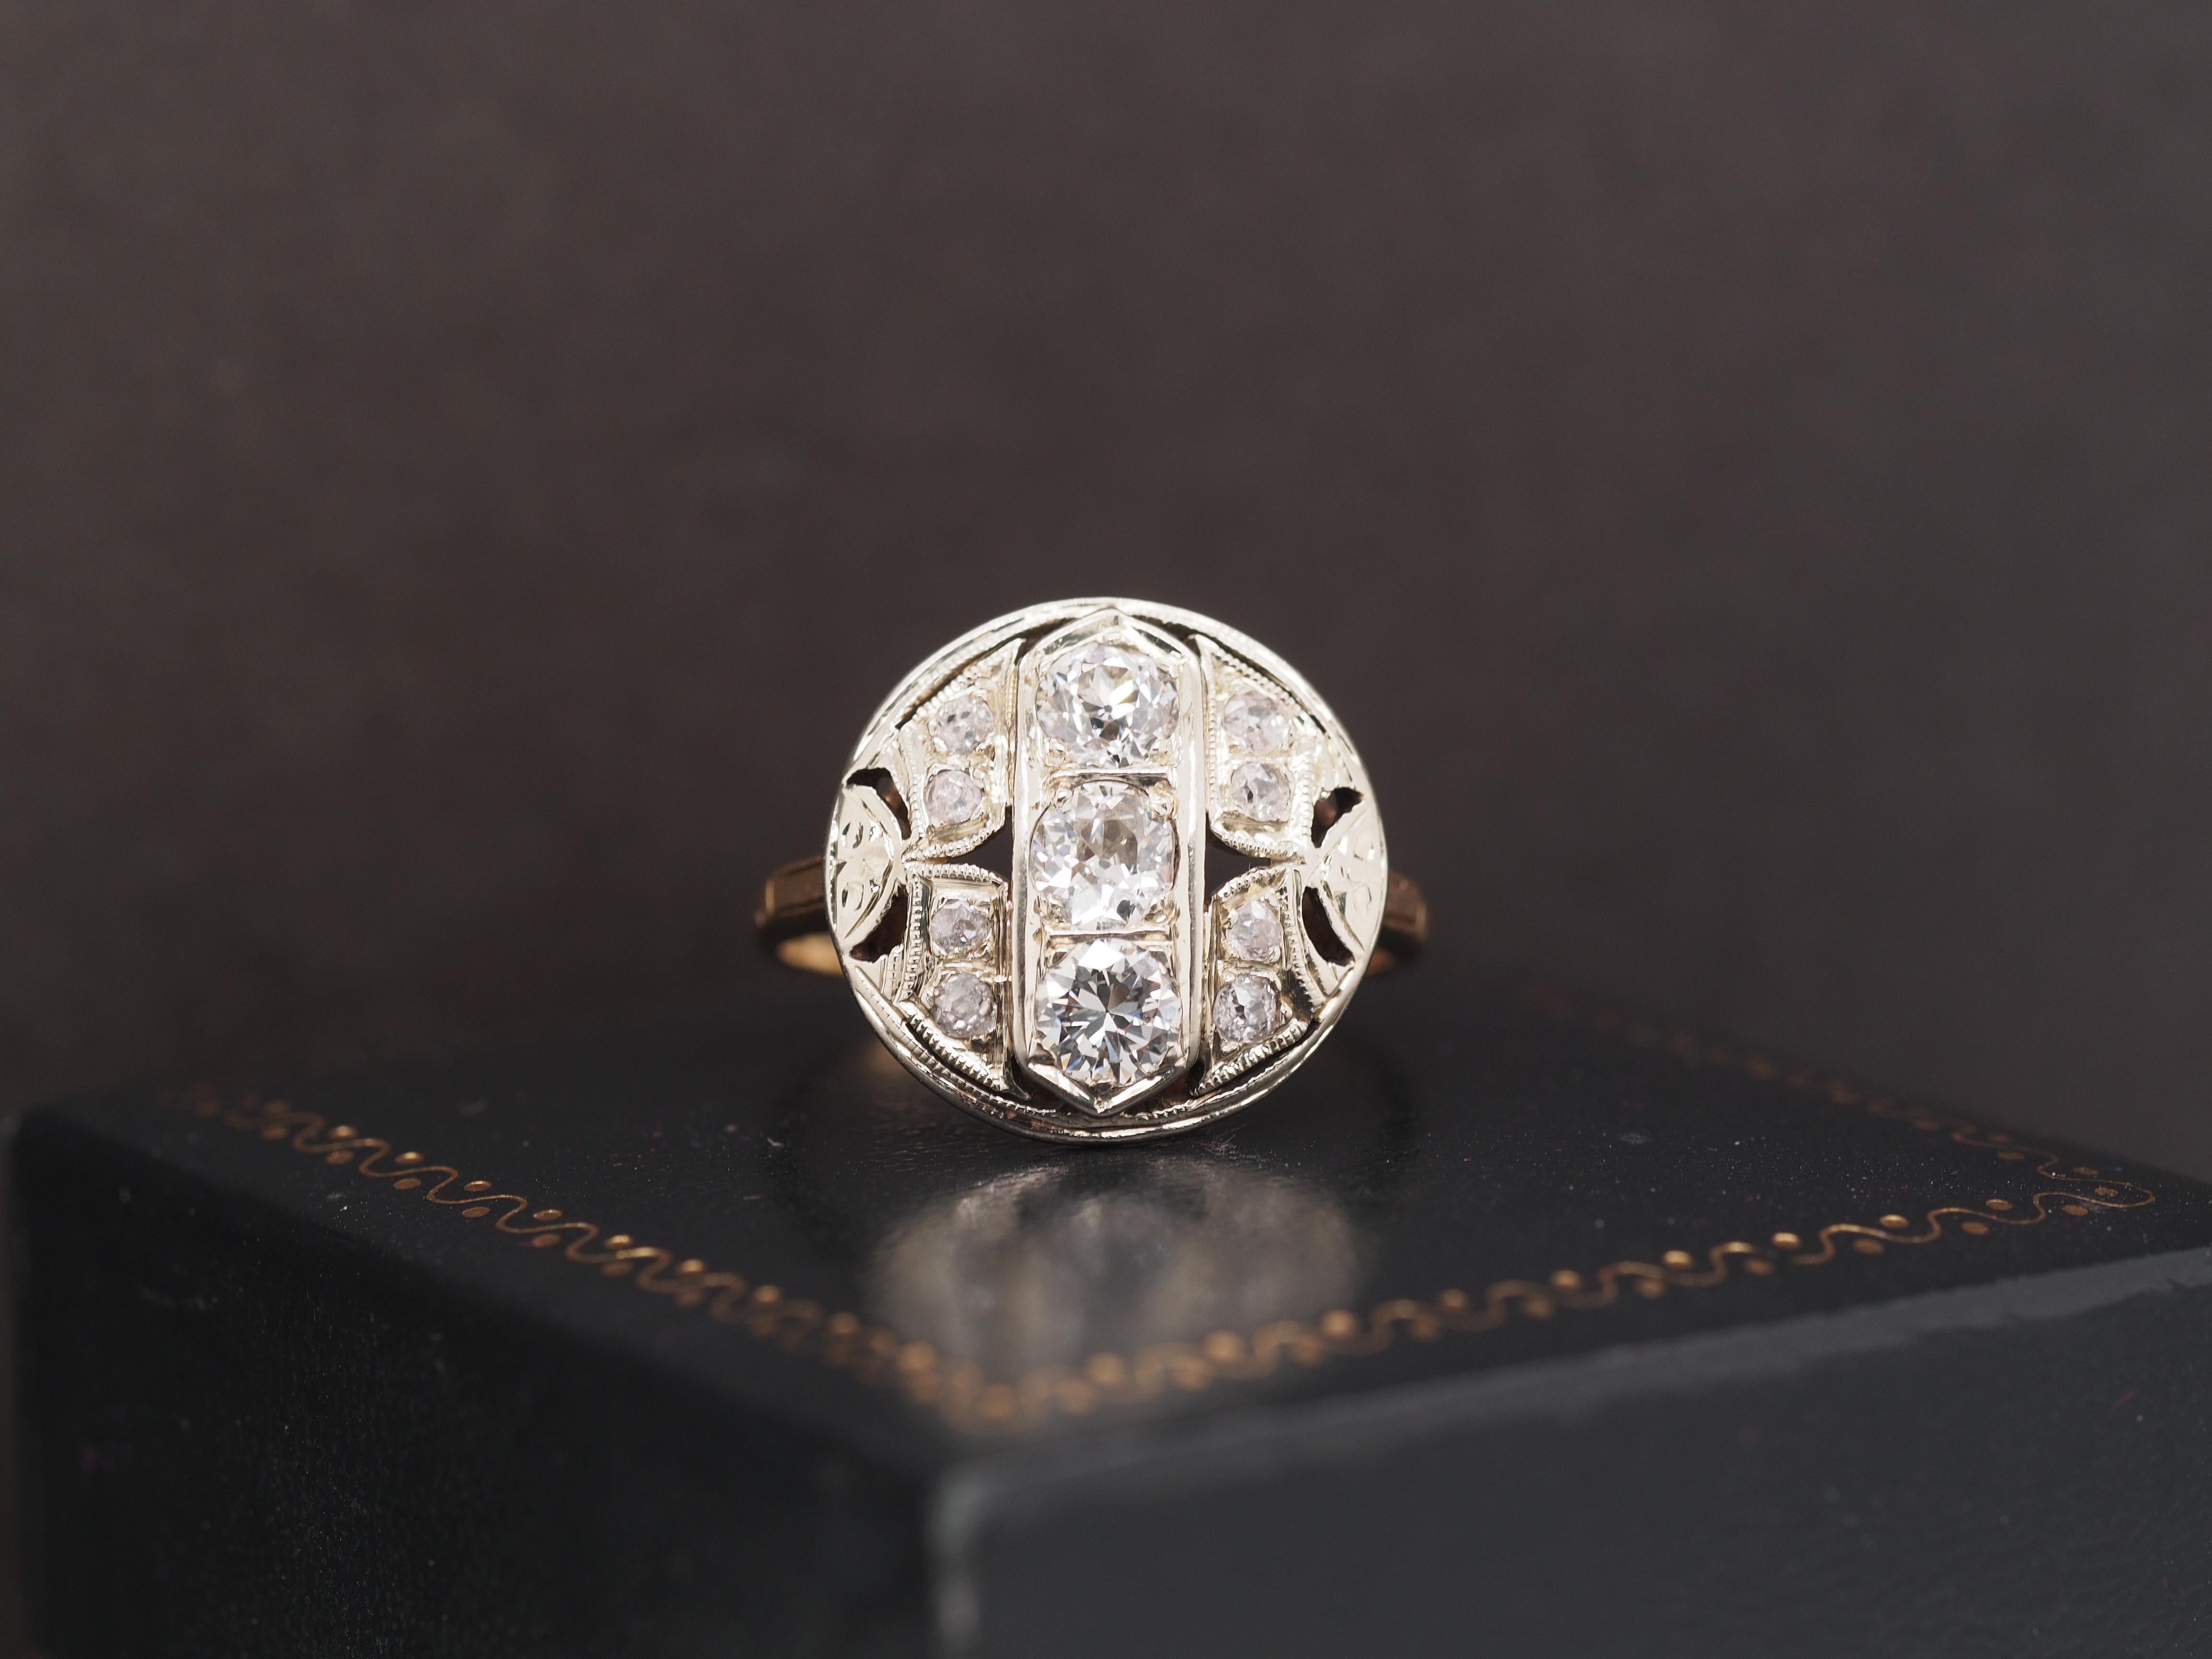 Year: 1920
Item Details:
Ring Size: 7.5
Metal Type: 14K Yellow Gold [Hallmarked, and Tested]
Weight: 3.3 grams
Diamond Details: Natural Diamonds Old Mine Cut 1.25cttw Color: H-I Clarity: VS/SI
Band Width: 1.5 mm
Condition: Excellent
Price: $1800